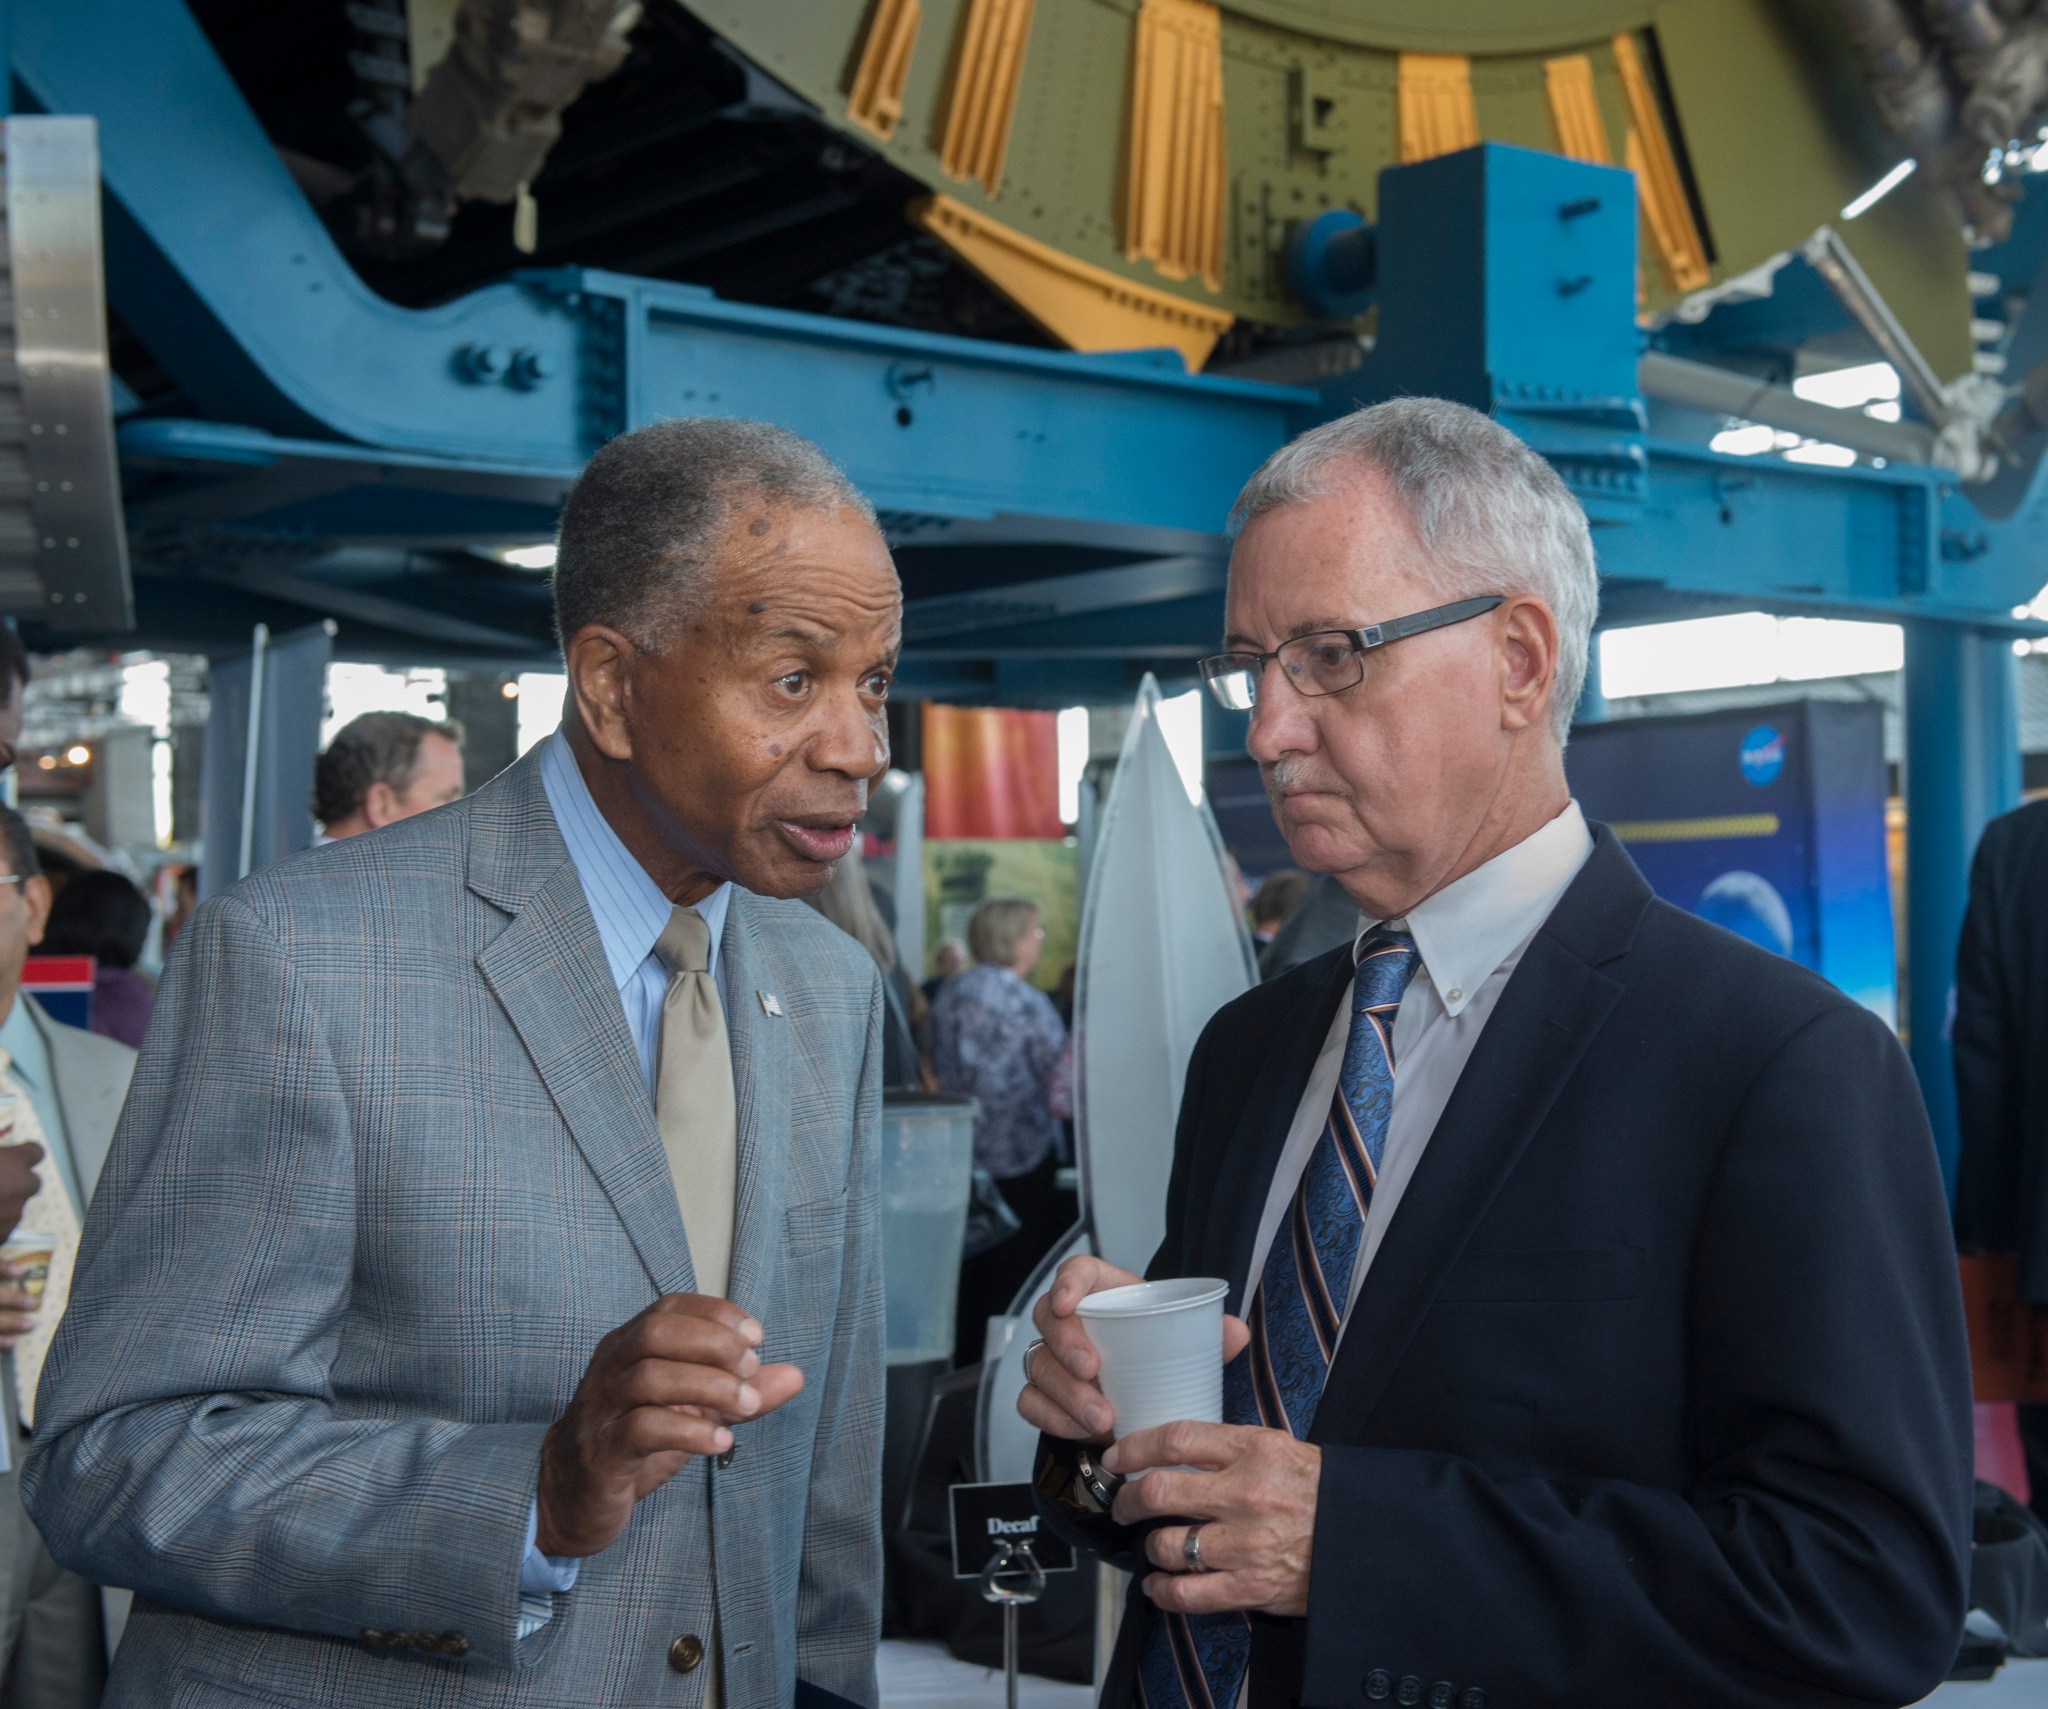 Dr. Marvin Carroll, left, president of Tec-Masters Inc., speaks with David Brock, small business specialist at NASA Marshall.